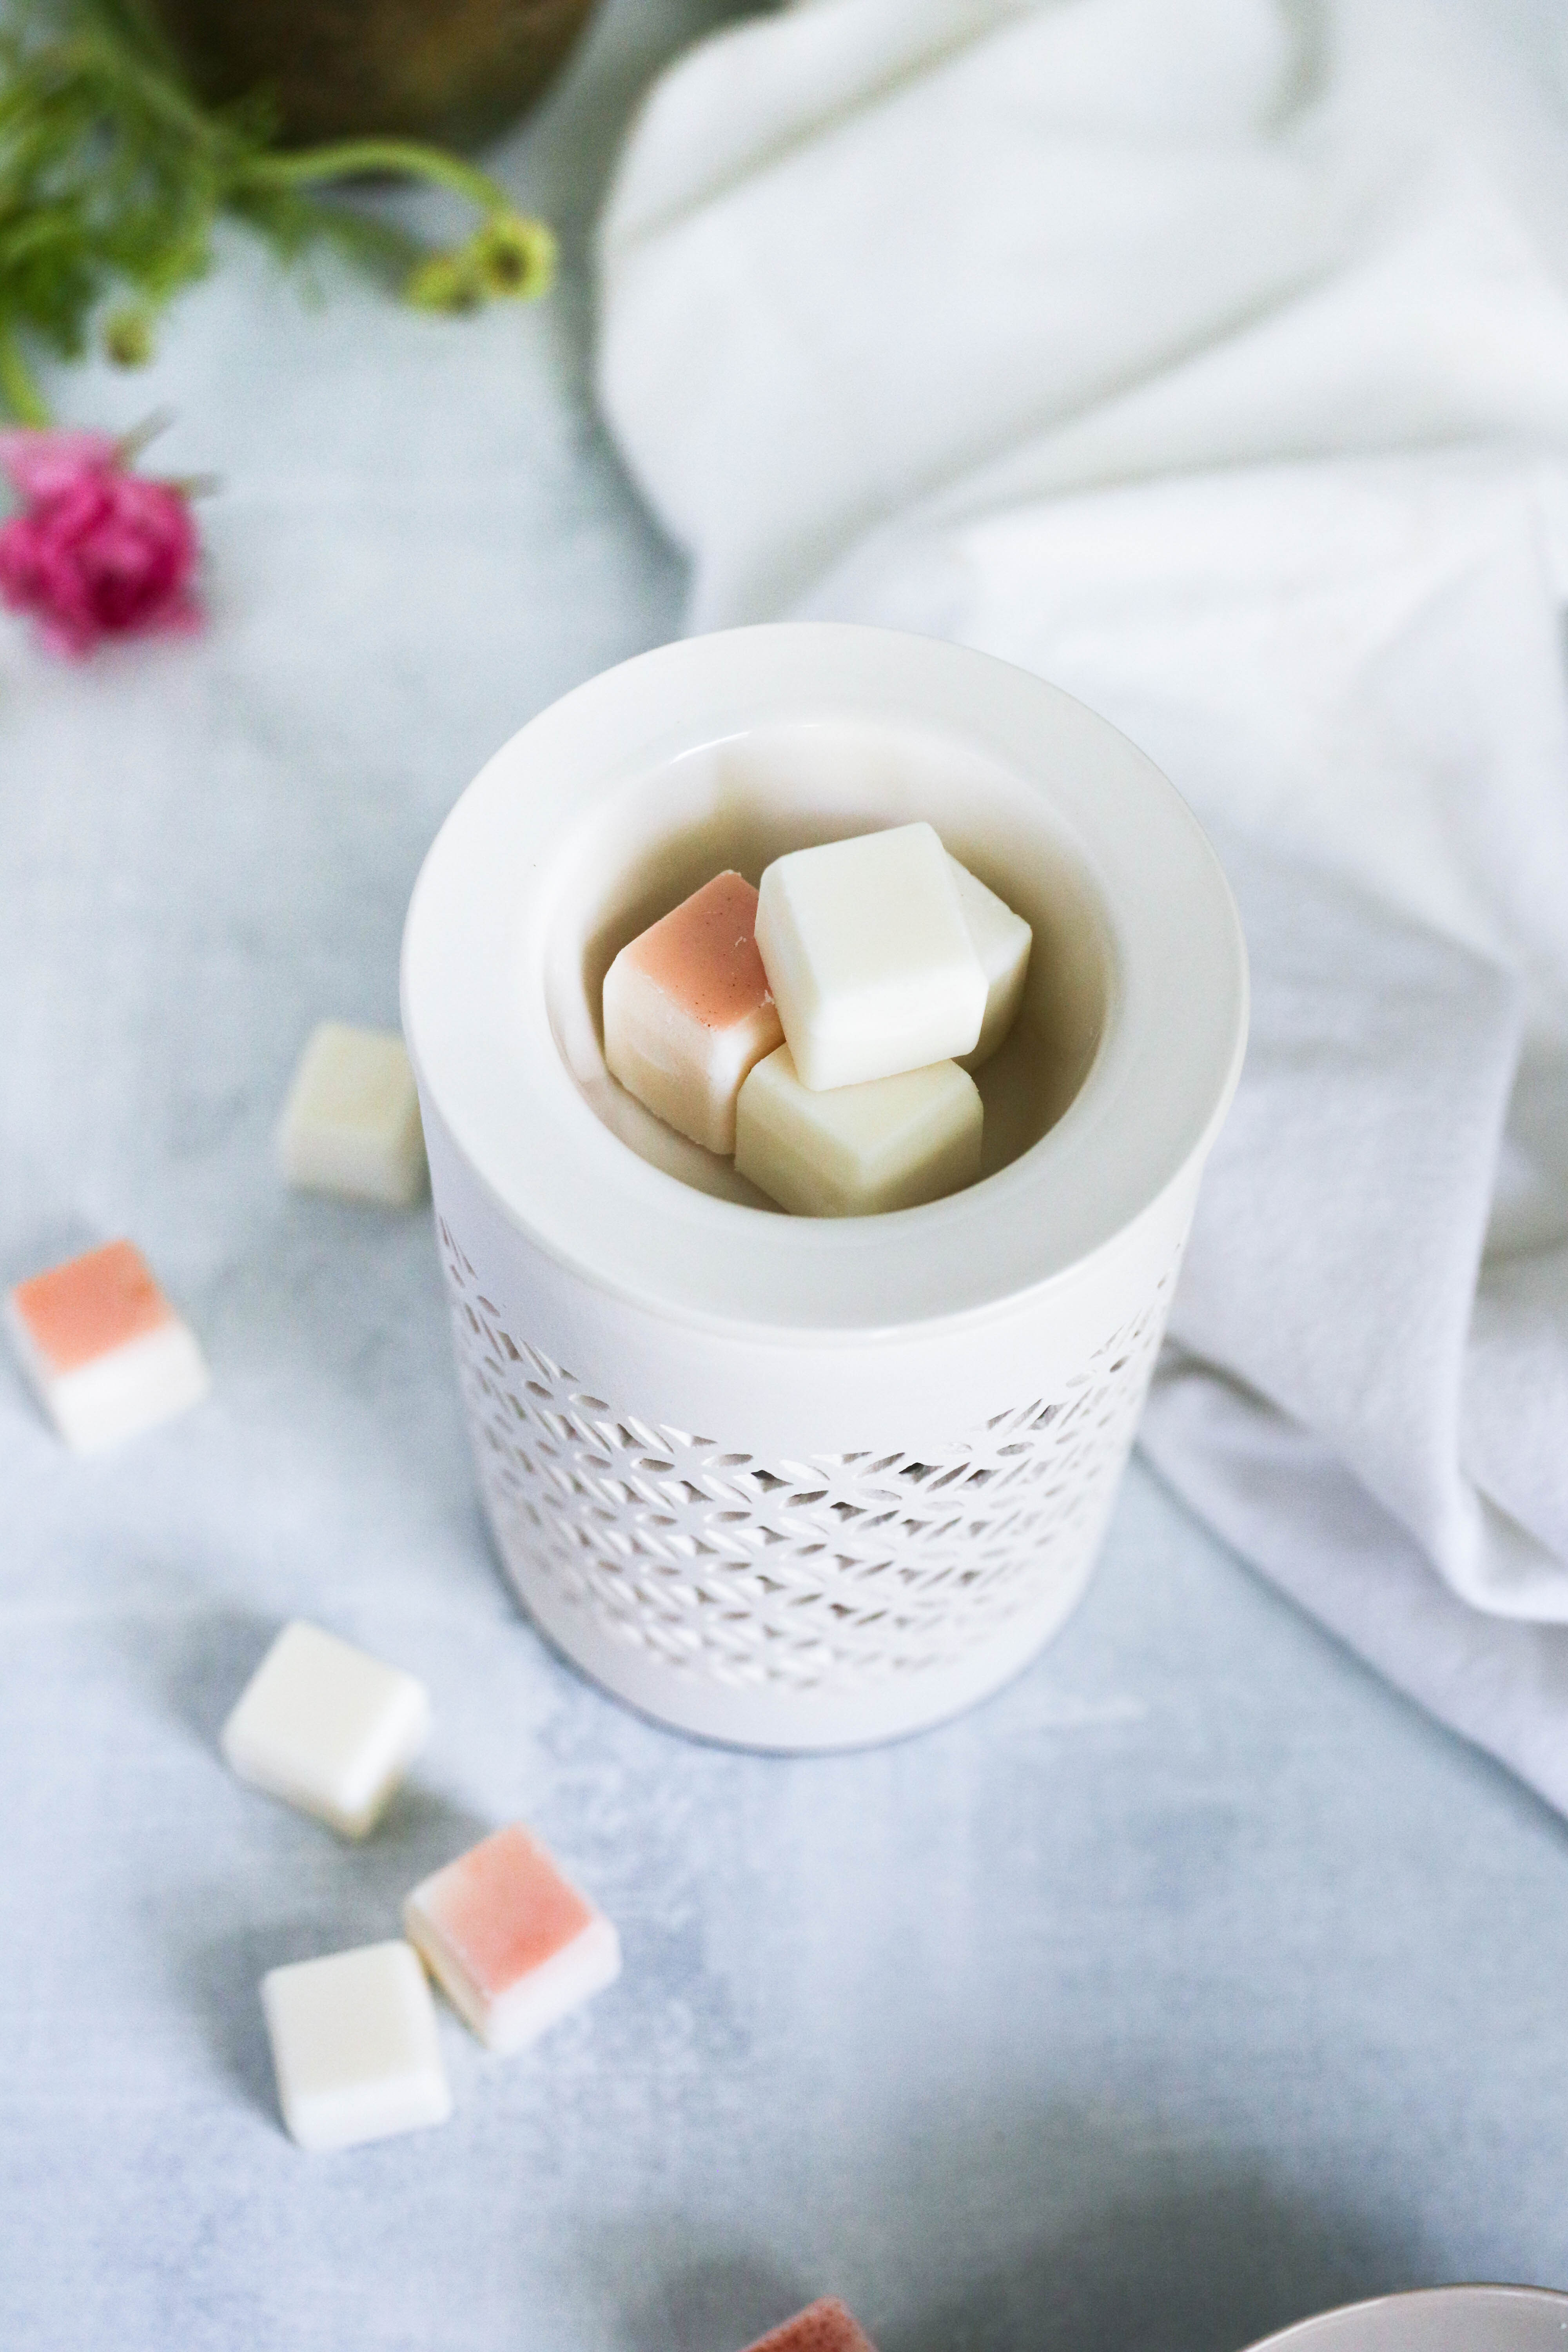 DIY inexpensive soy wax melts with essential oils (via hellonest.co)